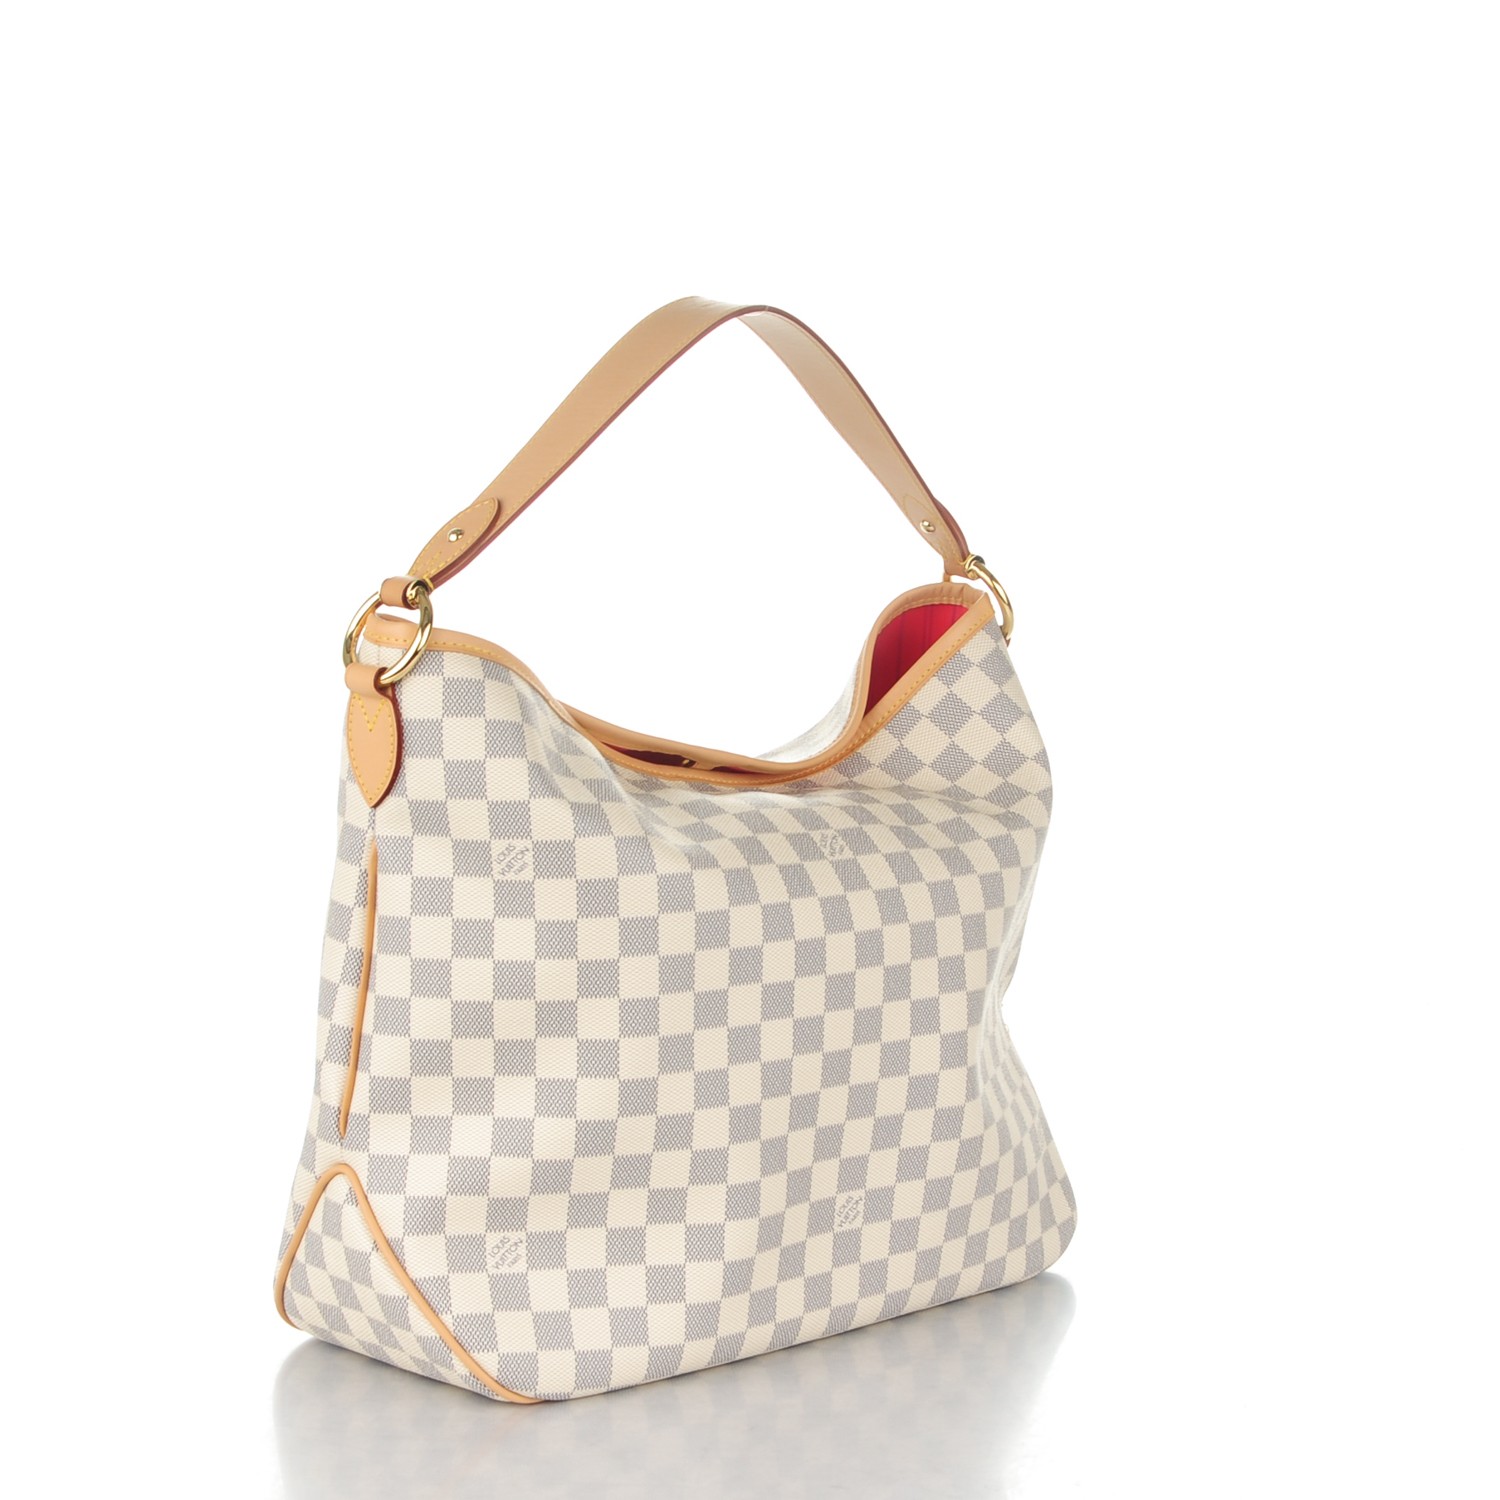 Pre-owned Delightful Damier Azur Pm Pink Lining